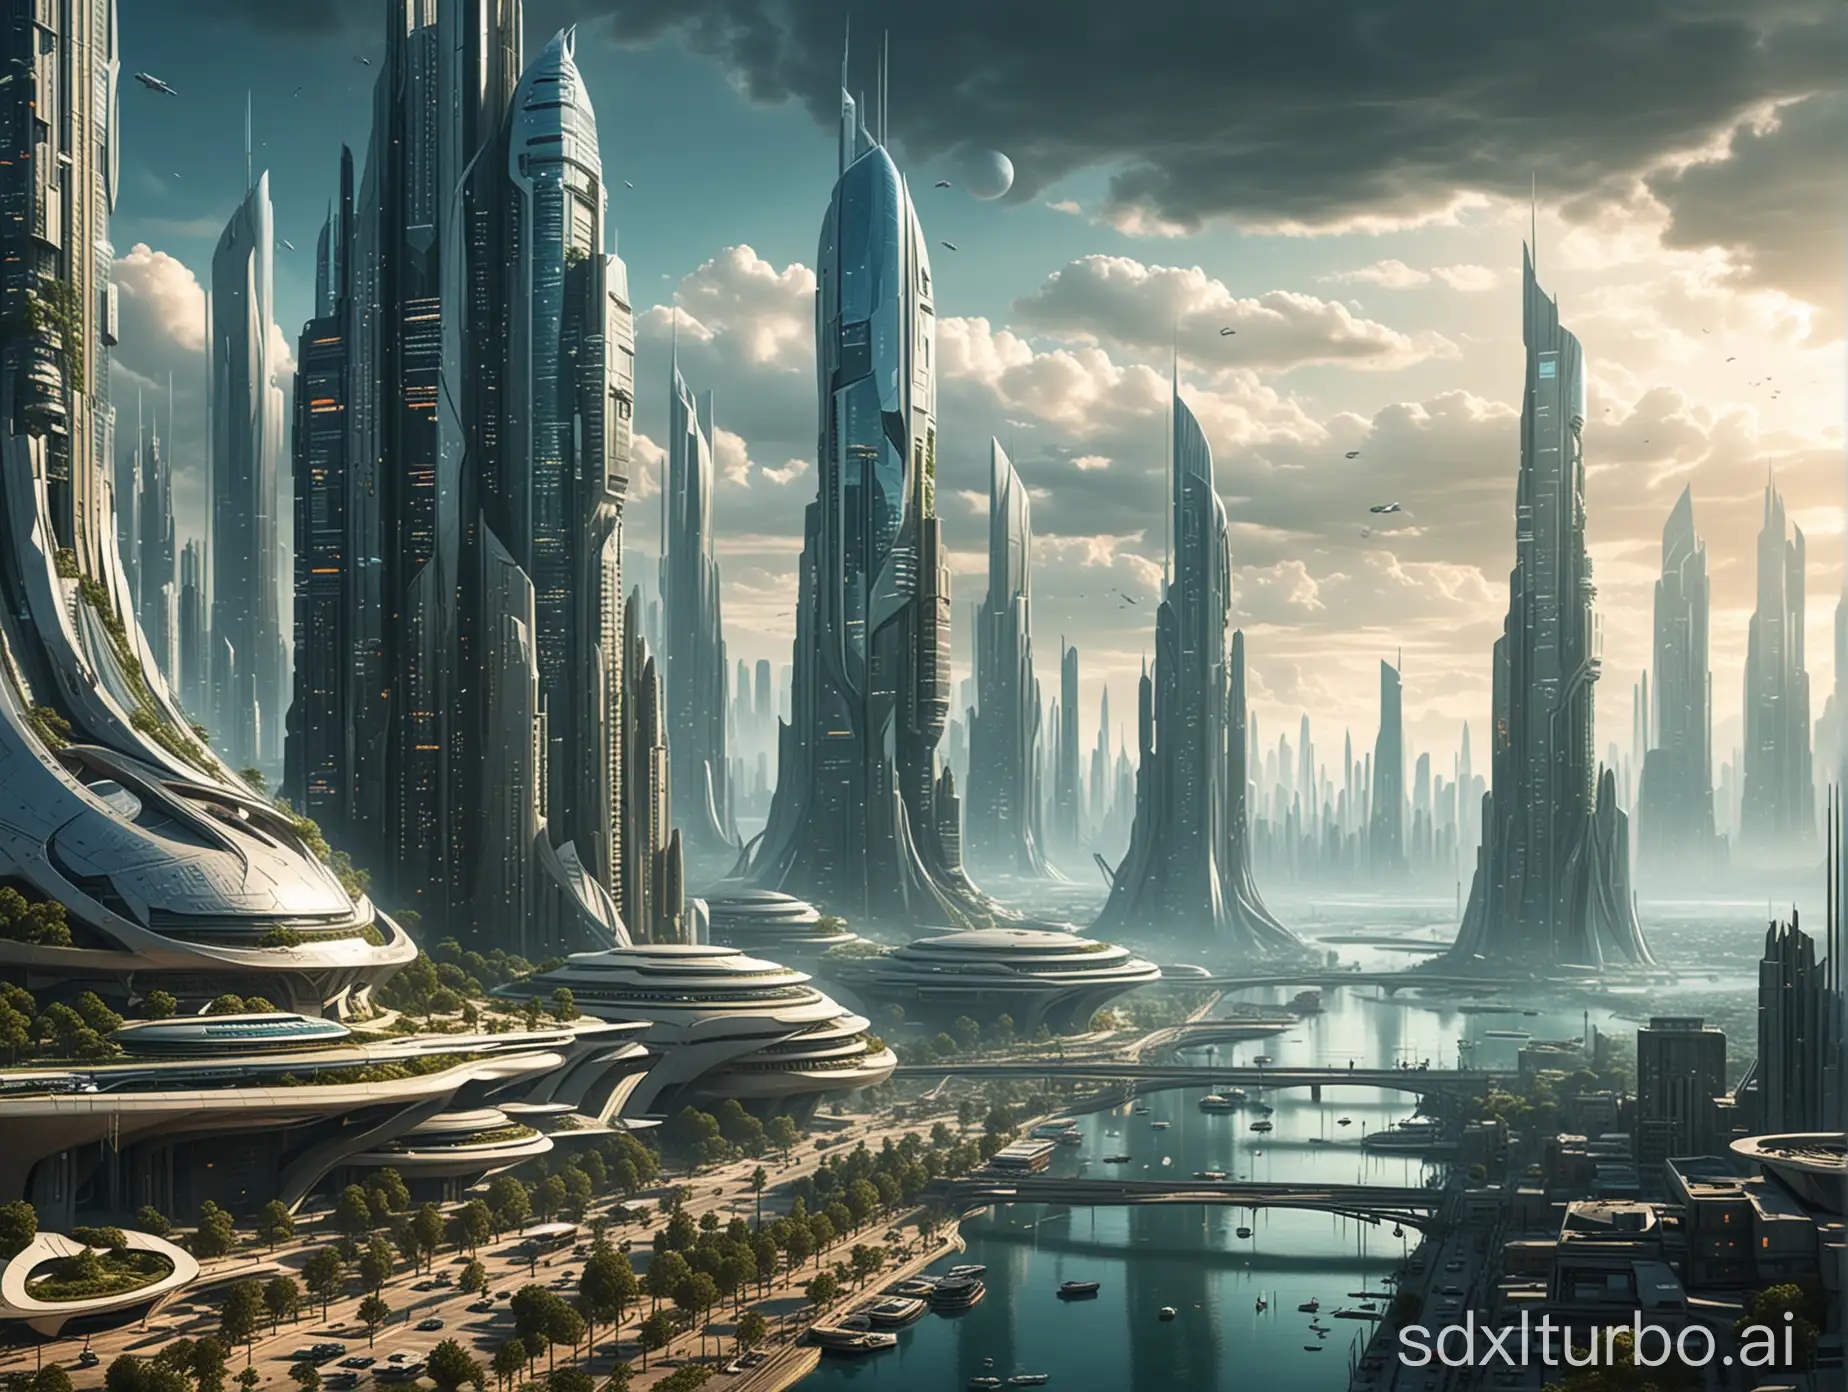 The year 2130. Depicting utopian futuristic city. At second glance the shortcomings are visible.